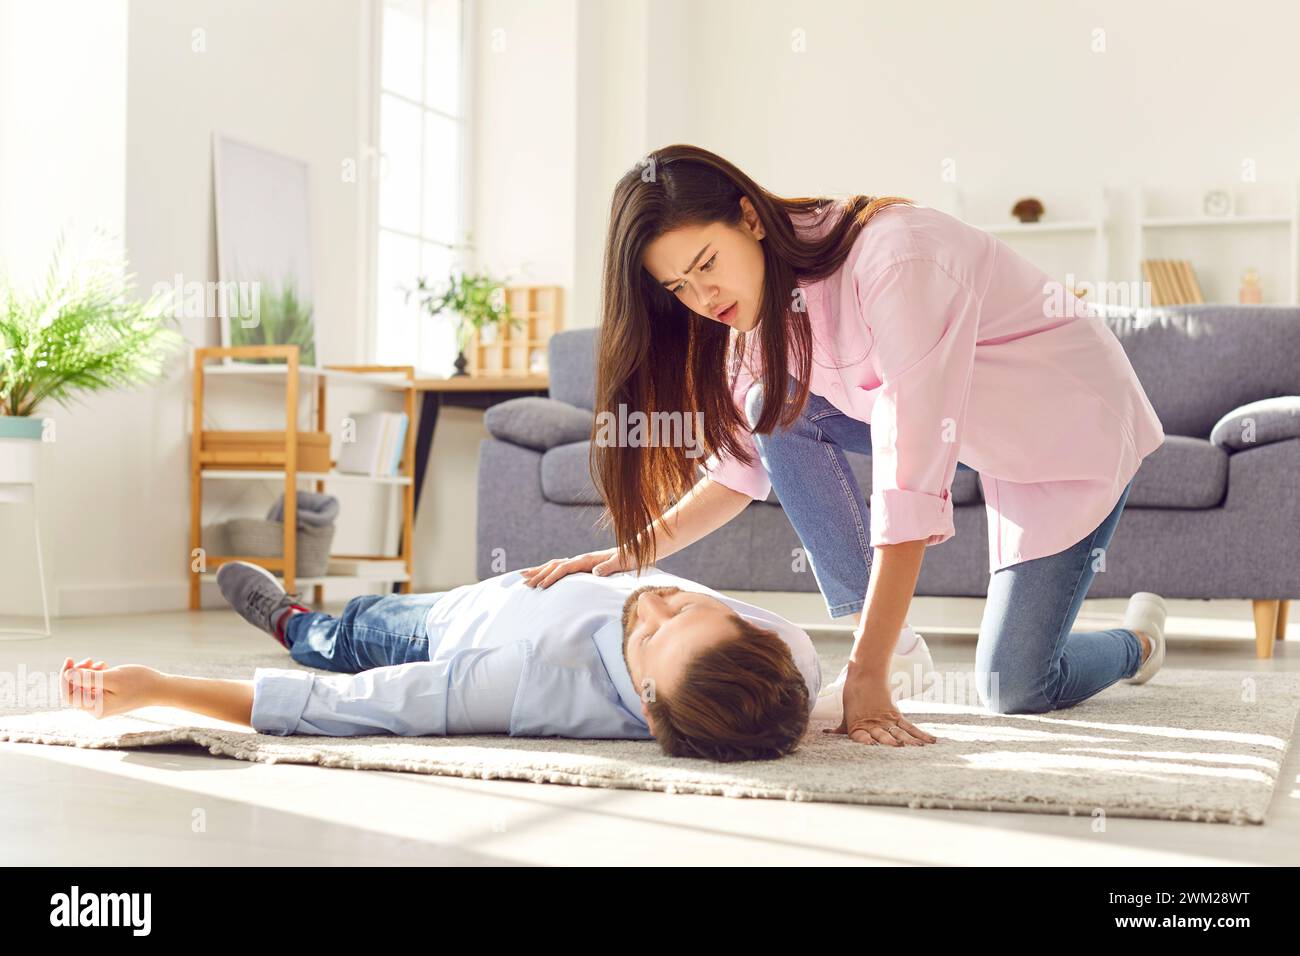 Unconscious man with heart attack lying at home with wife trying to provide first aid emergency Stock Photo